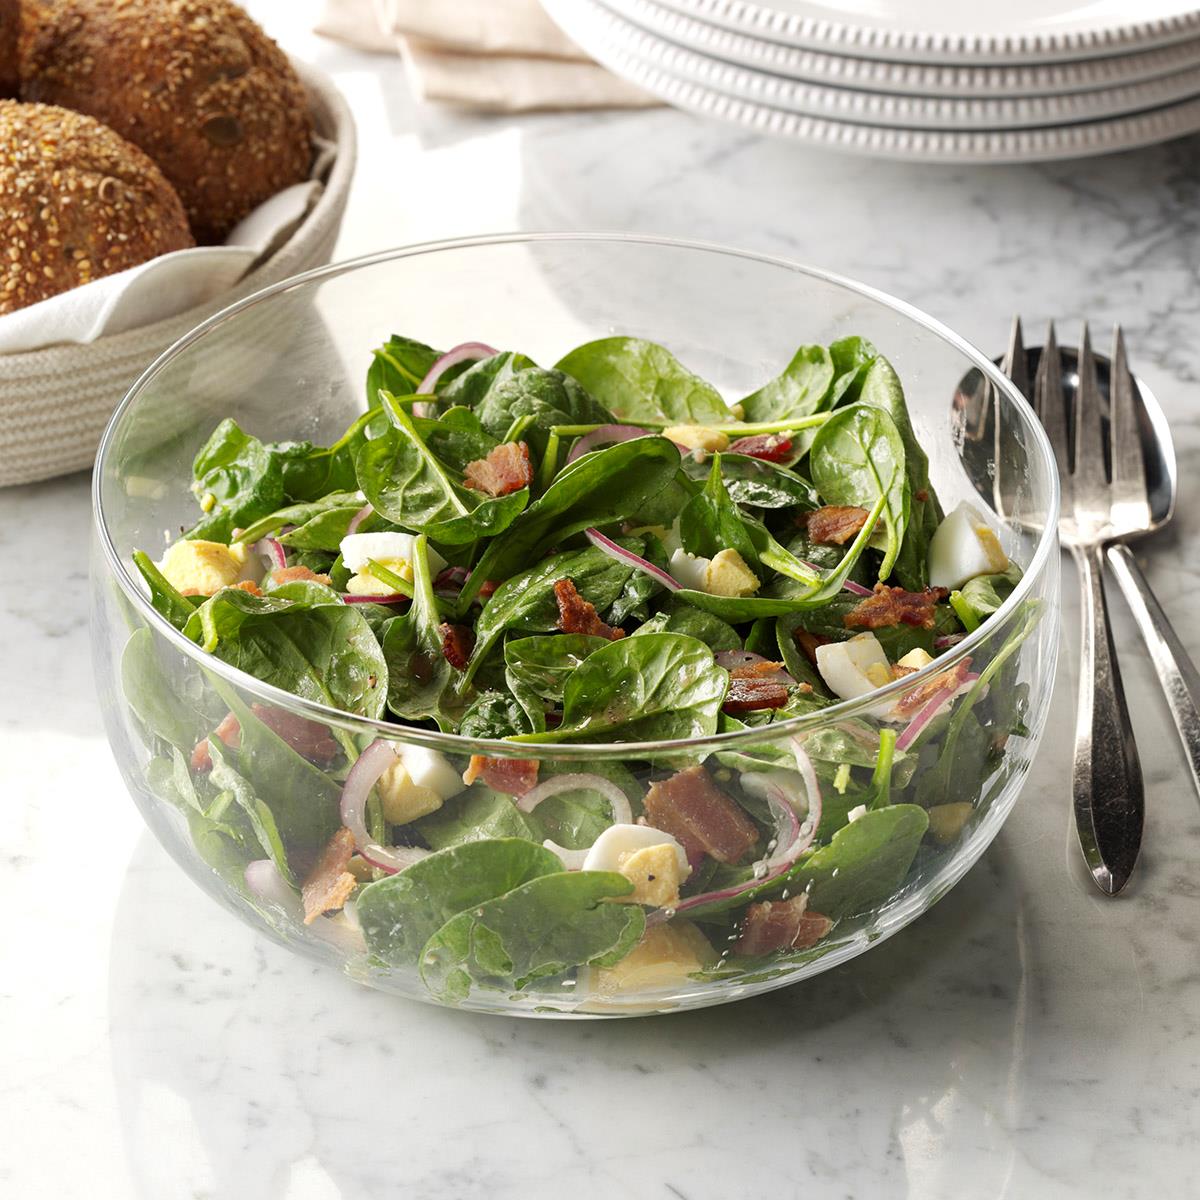 Spinach Salad with Warm Bacon Dressing image.